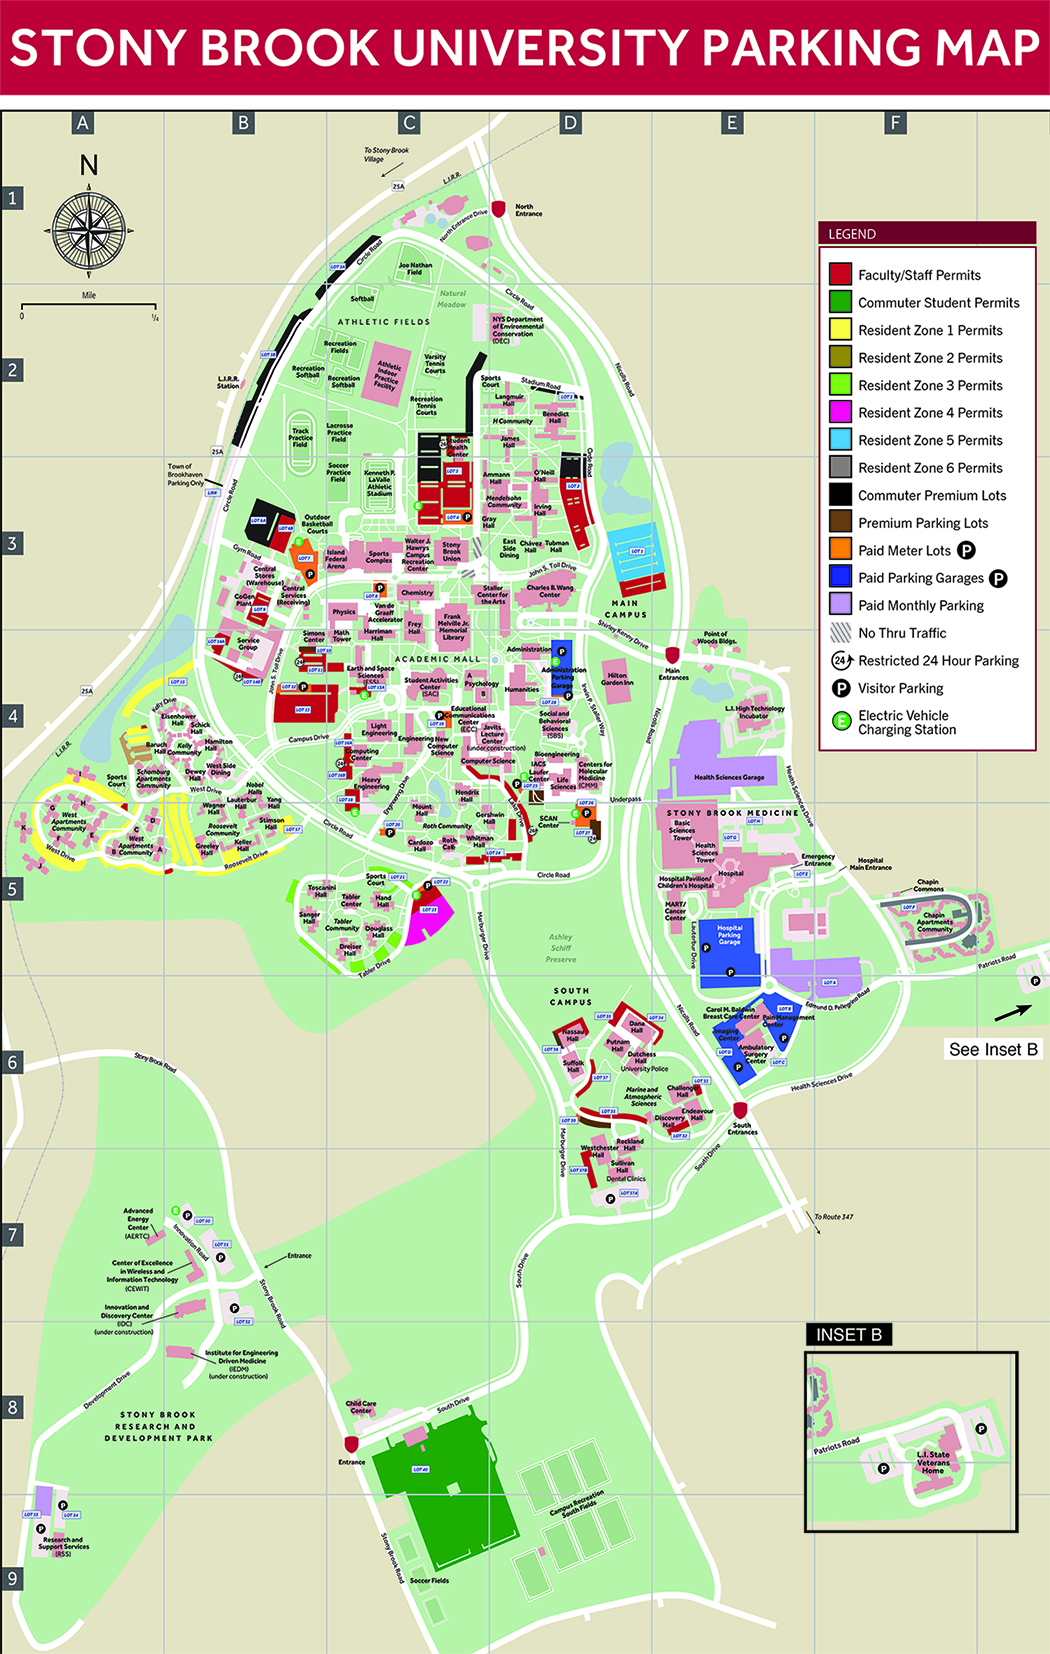 Where to Park Map Image